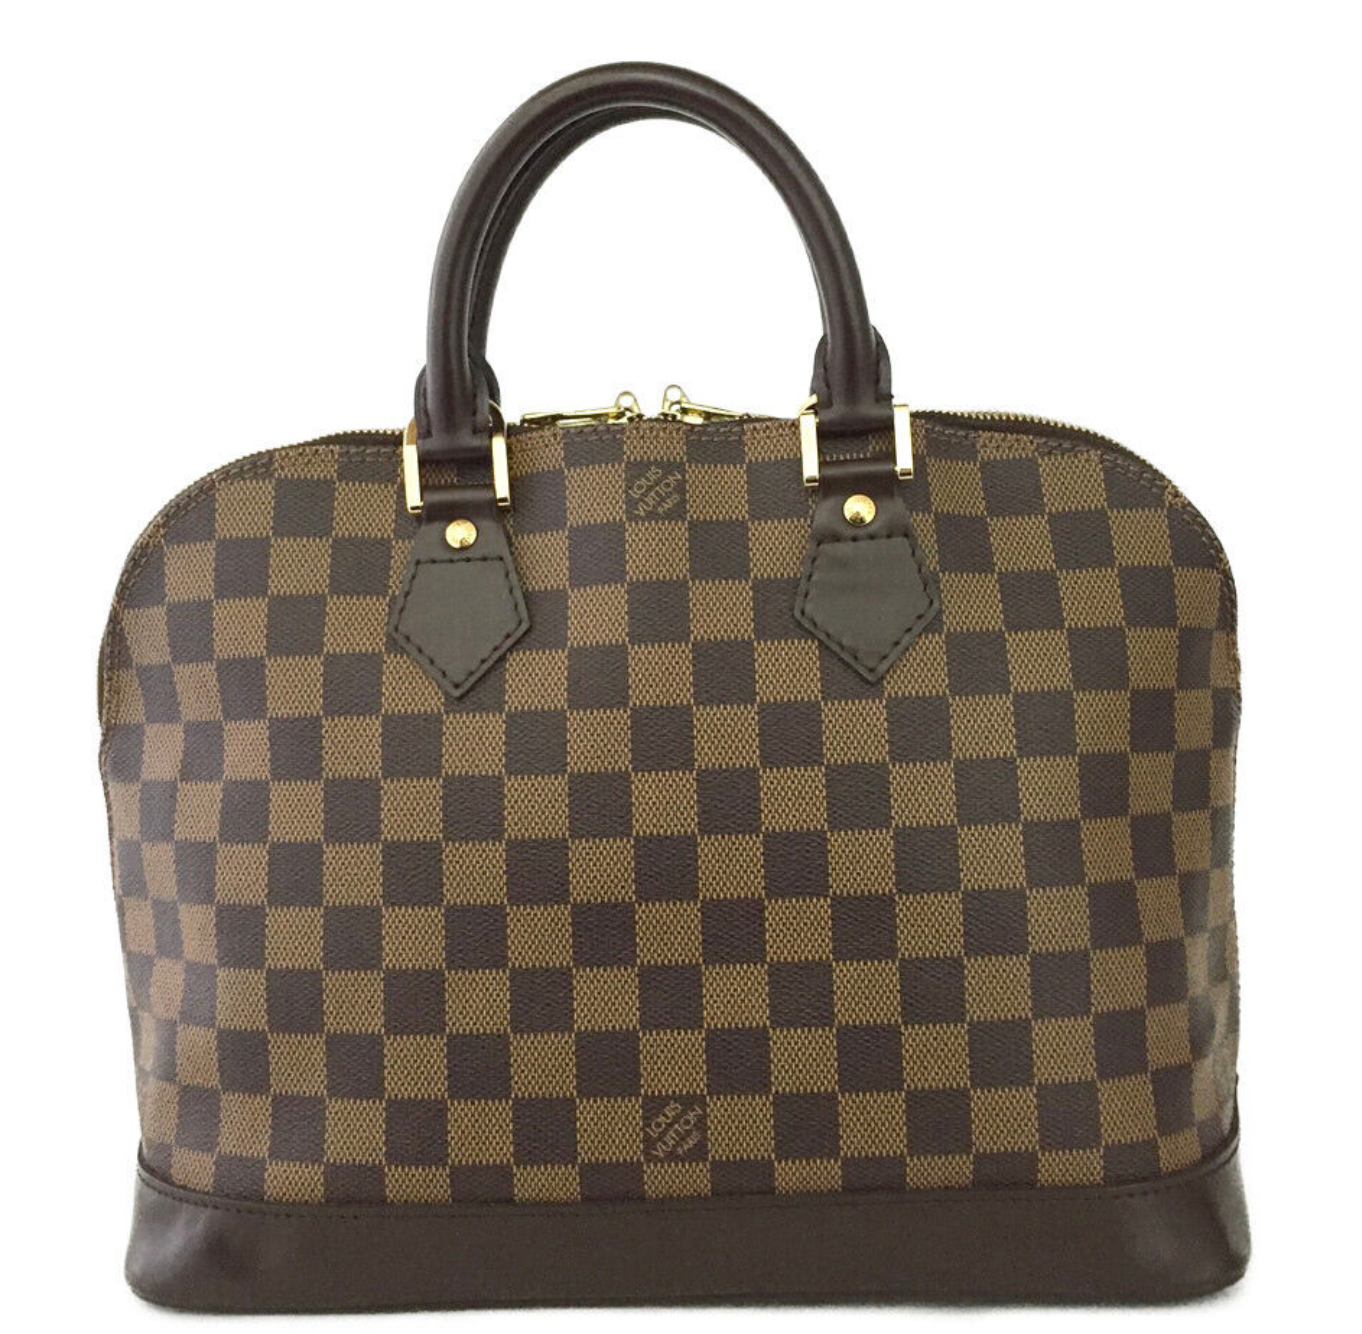 LOUIS VUITTON All in PM Tote Bag Handbag Shoulderbag M47028｜Product  Code：2101213786335｜BRAND OFF Online Store